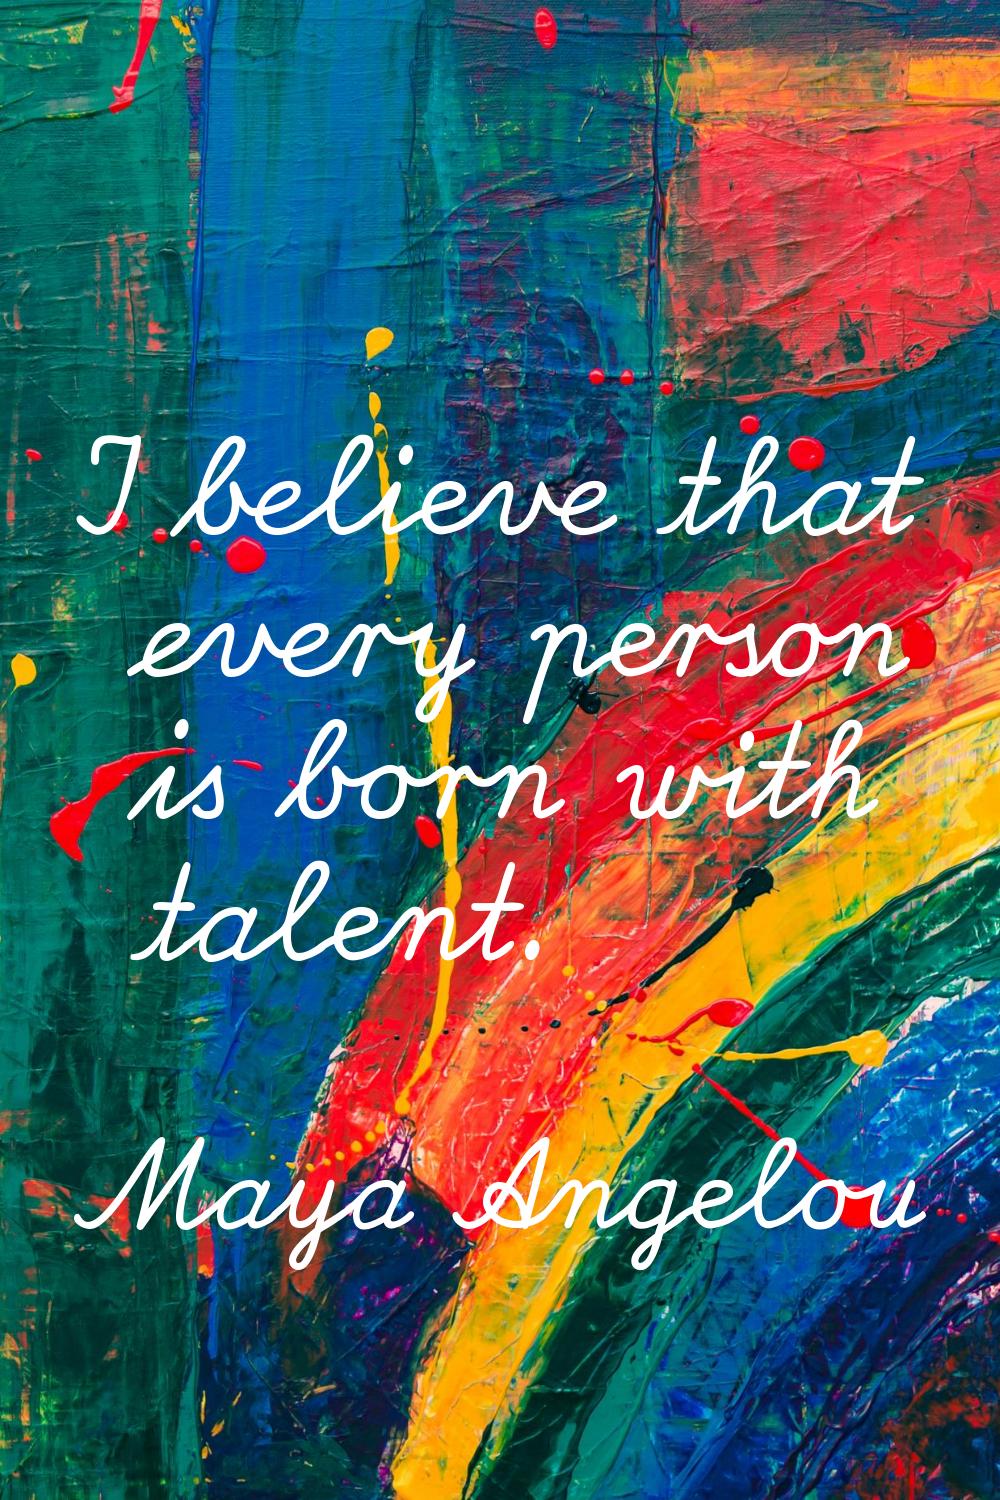 I believe that every person is born with talent.